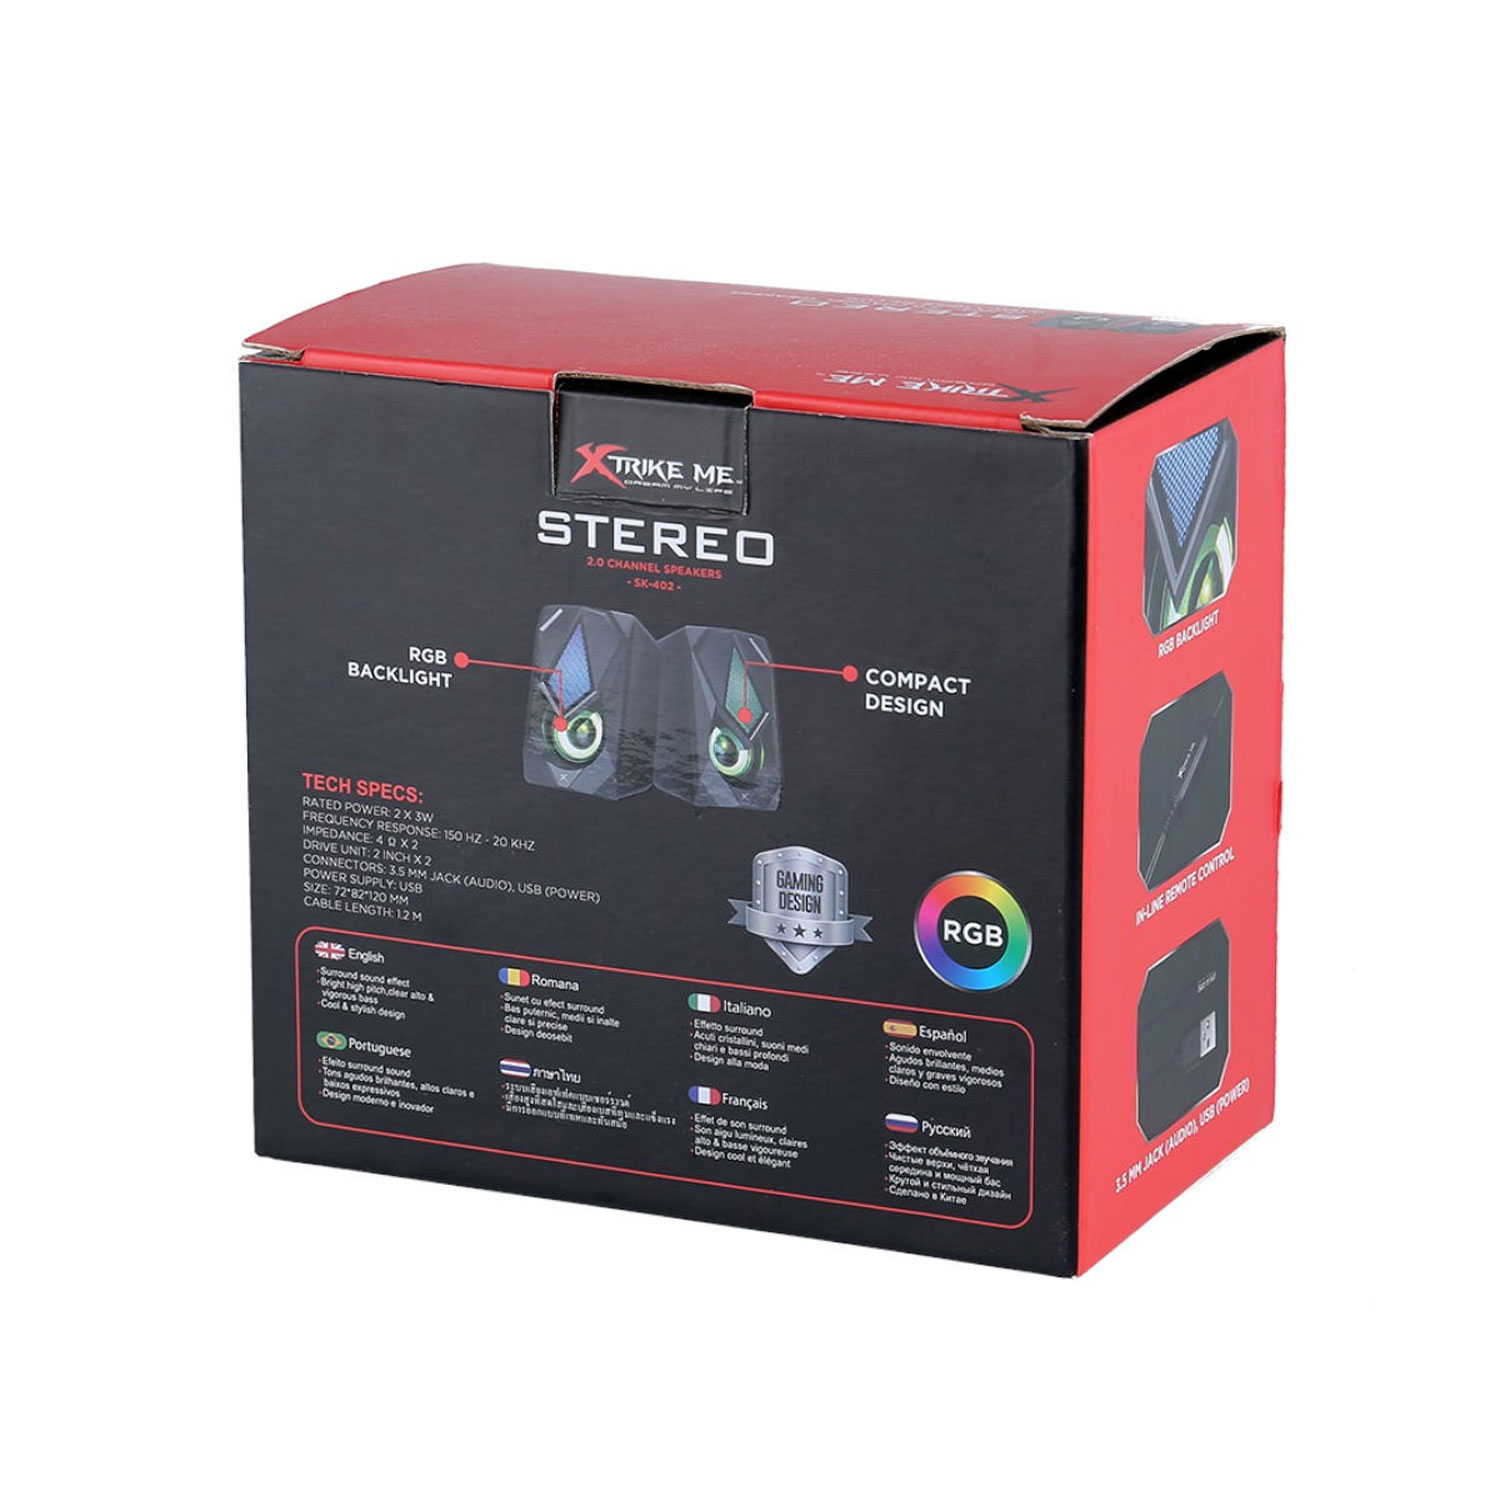 2.0 Stereo Gaming Speaker with RGB Backlight 3.5 mm jack Audio